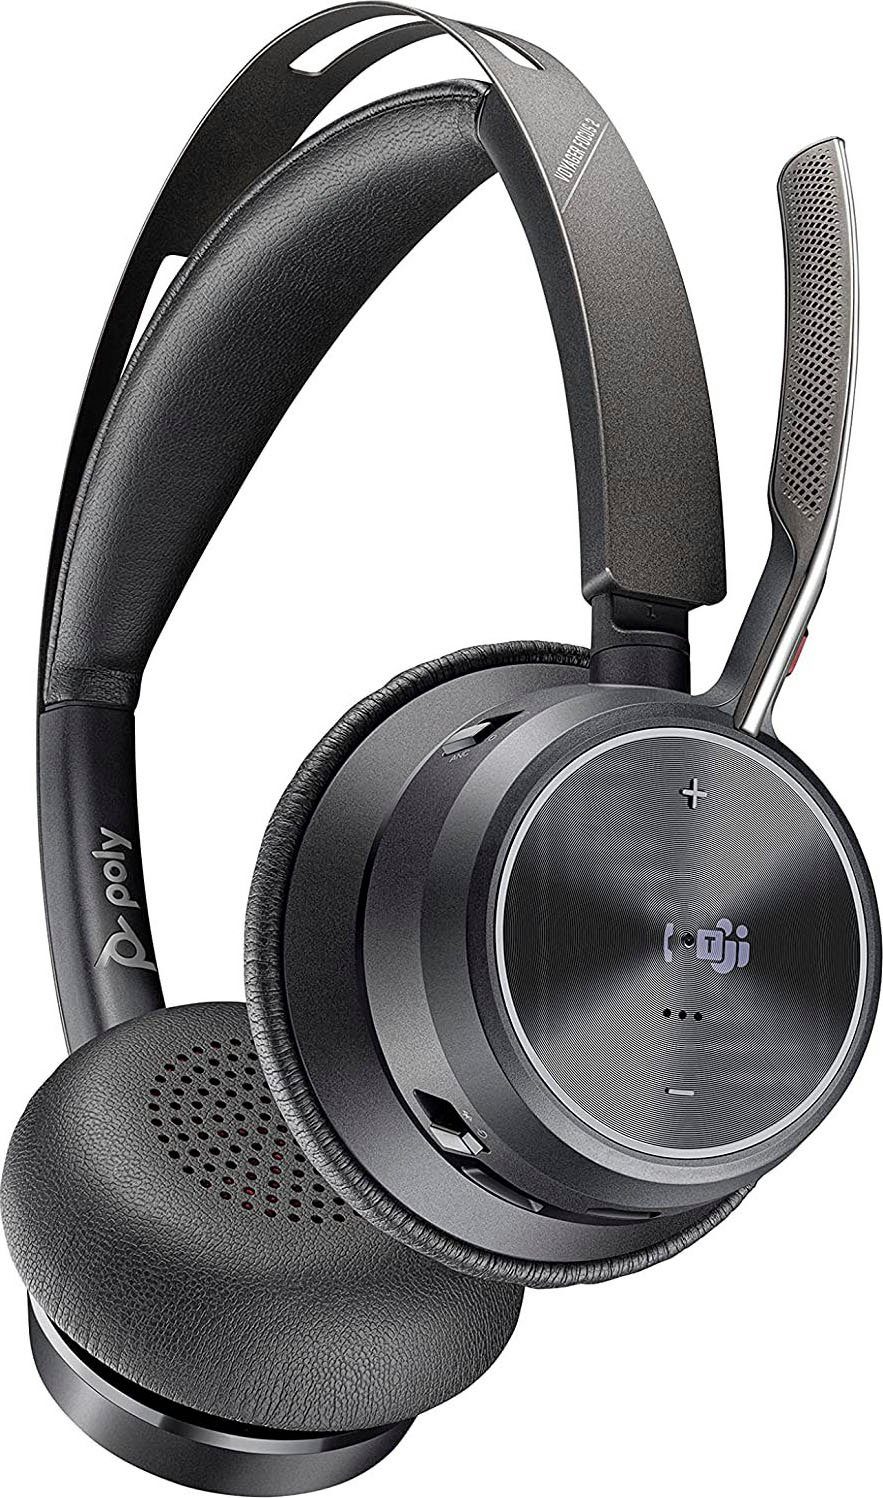 (Noise-Cancelling, Wireless-Headset Bluetooth) UC Poly Focus Voyager